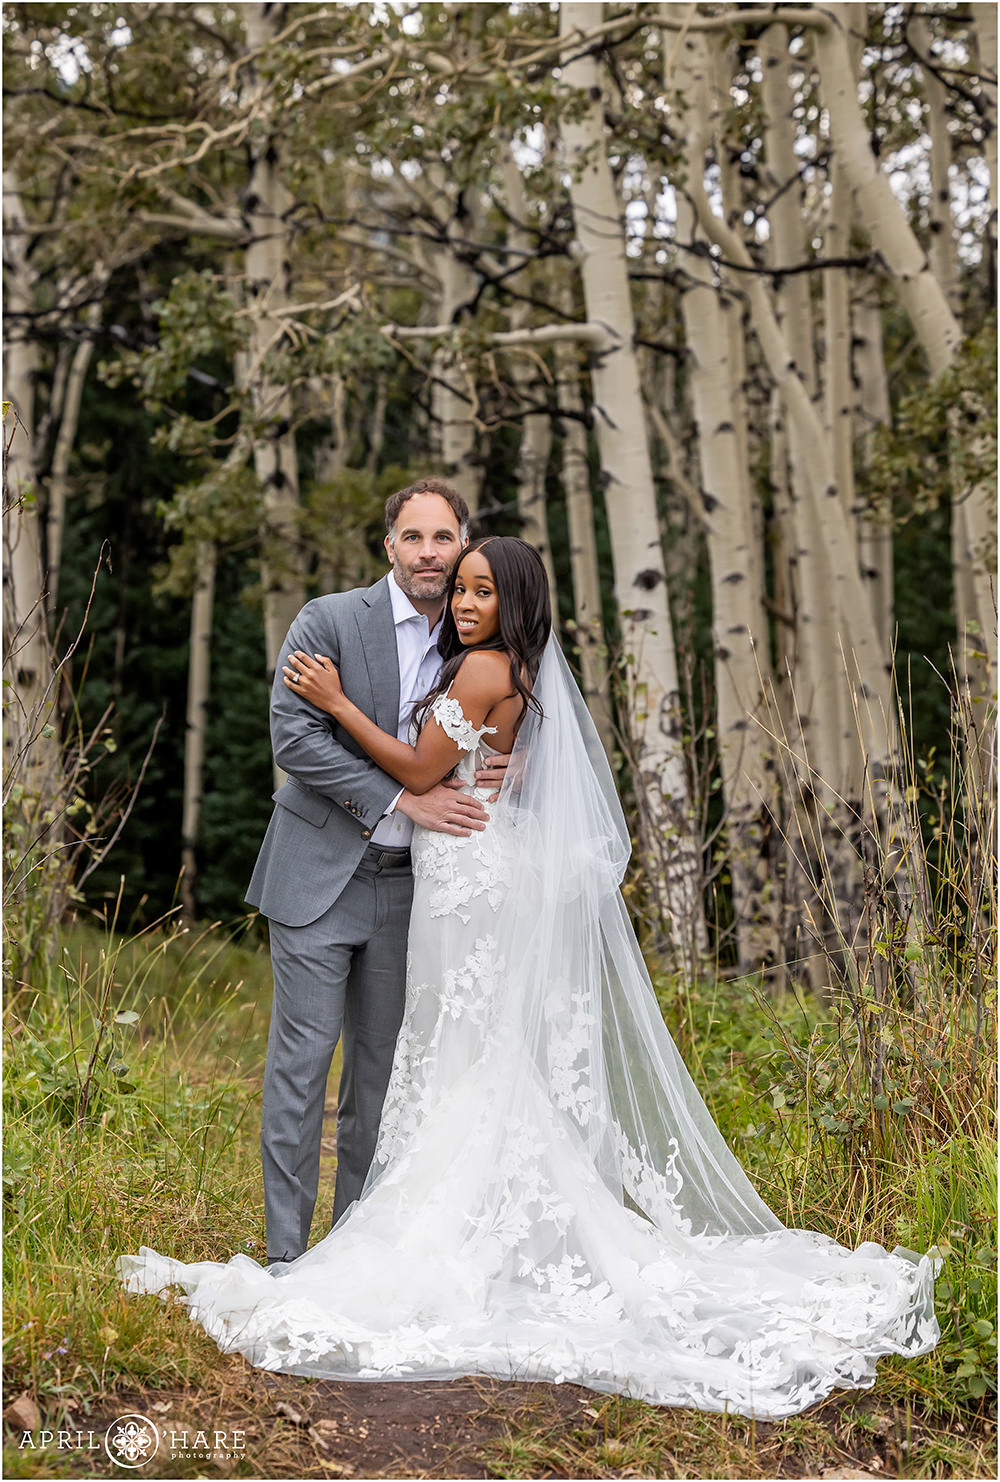 Beautiful bride with her husband wearing a stunning lace wedding gown in the woods with an aspen tree backdrop in Evergreen Colorado